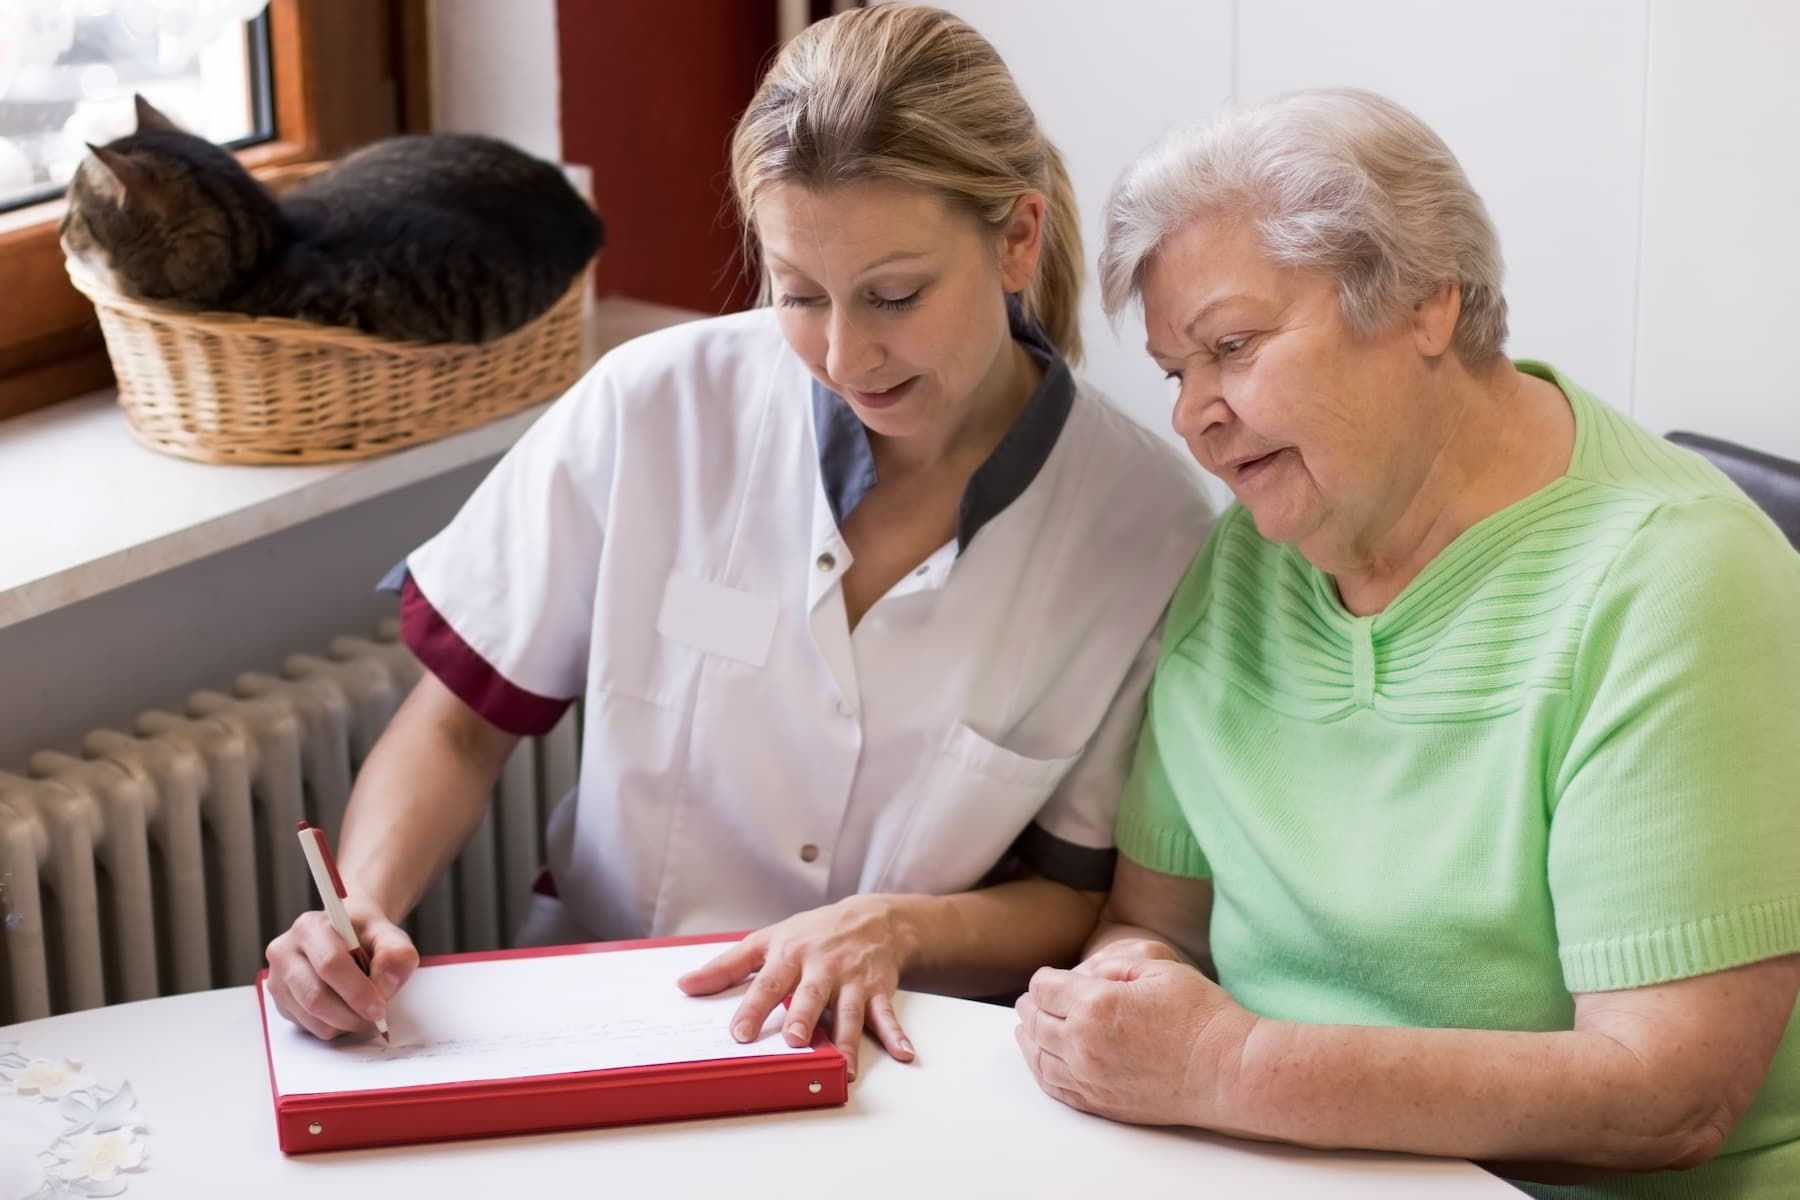 A young woman caregiver writes a note in a notebook while her older female patient watches from beside her.